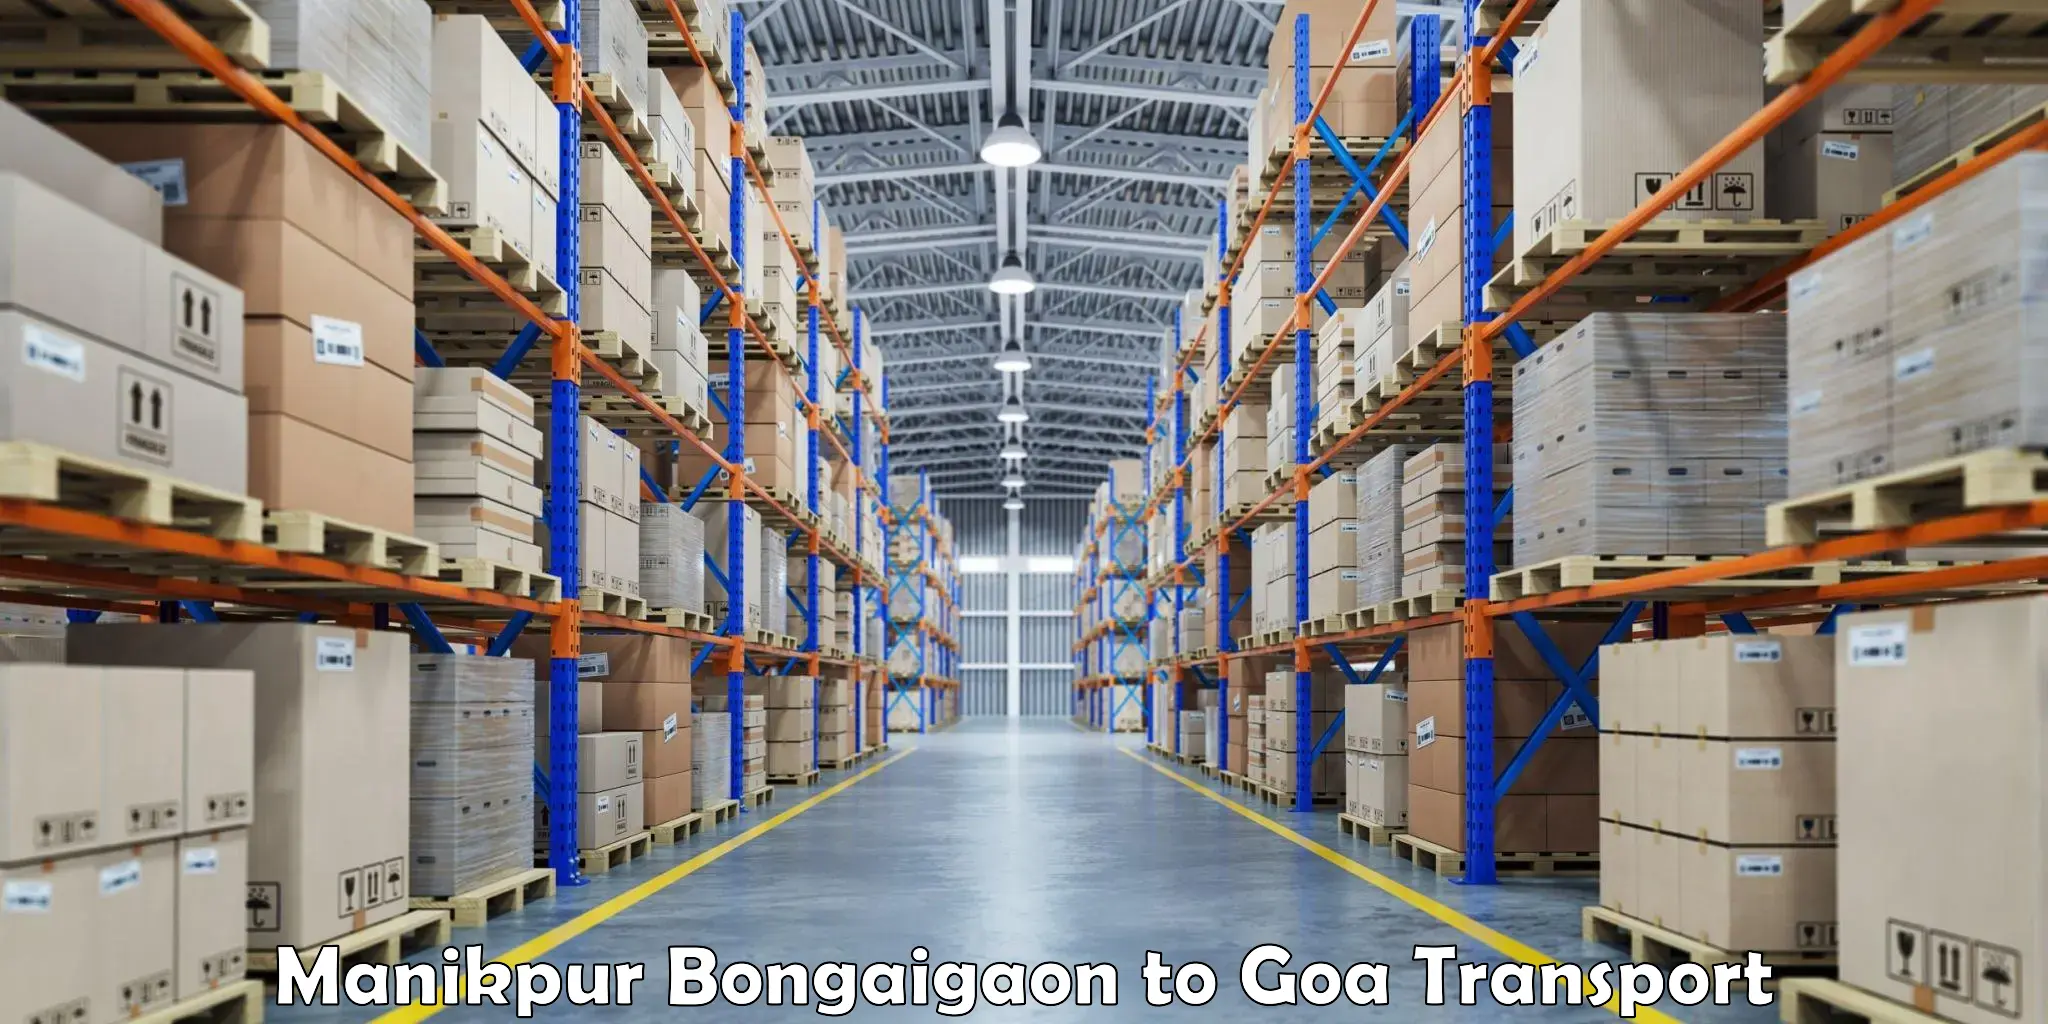 Air cargo transport services in Manikpur Bongaigaon to Bardez